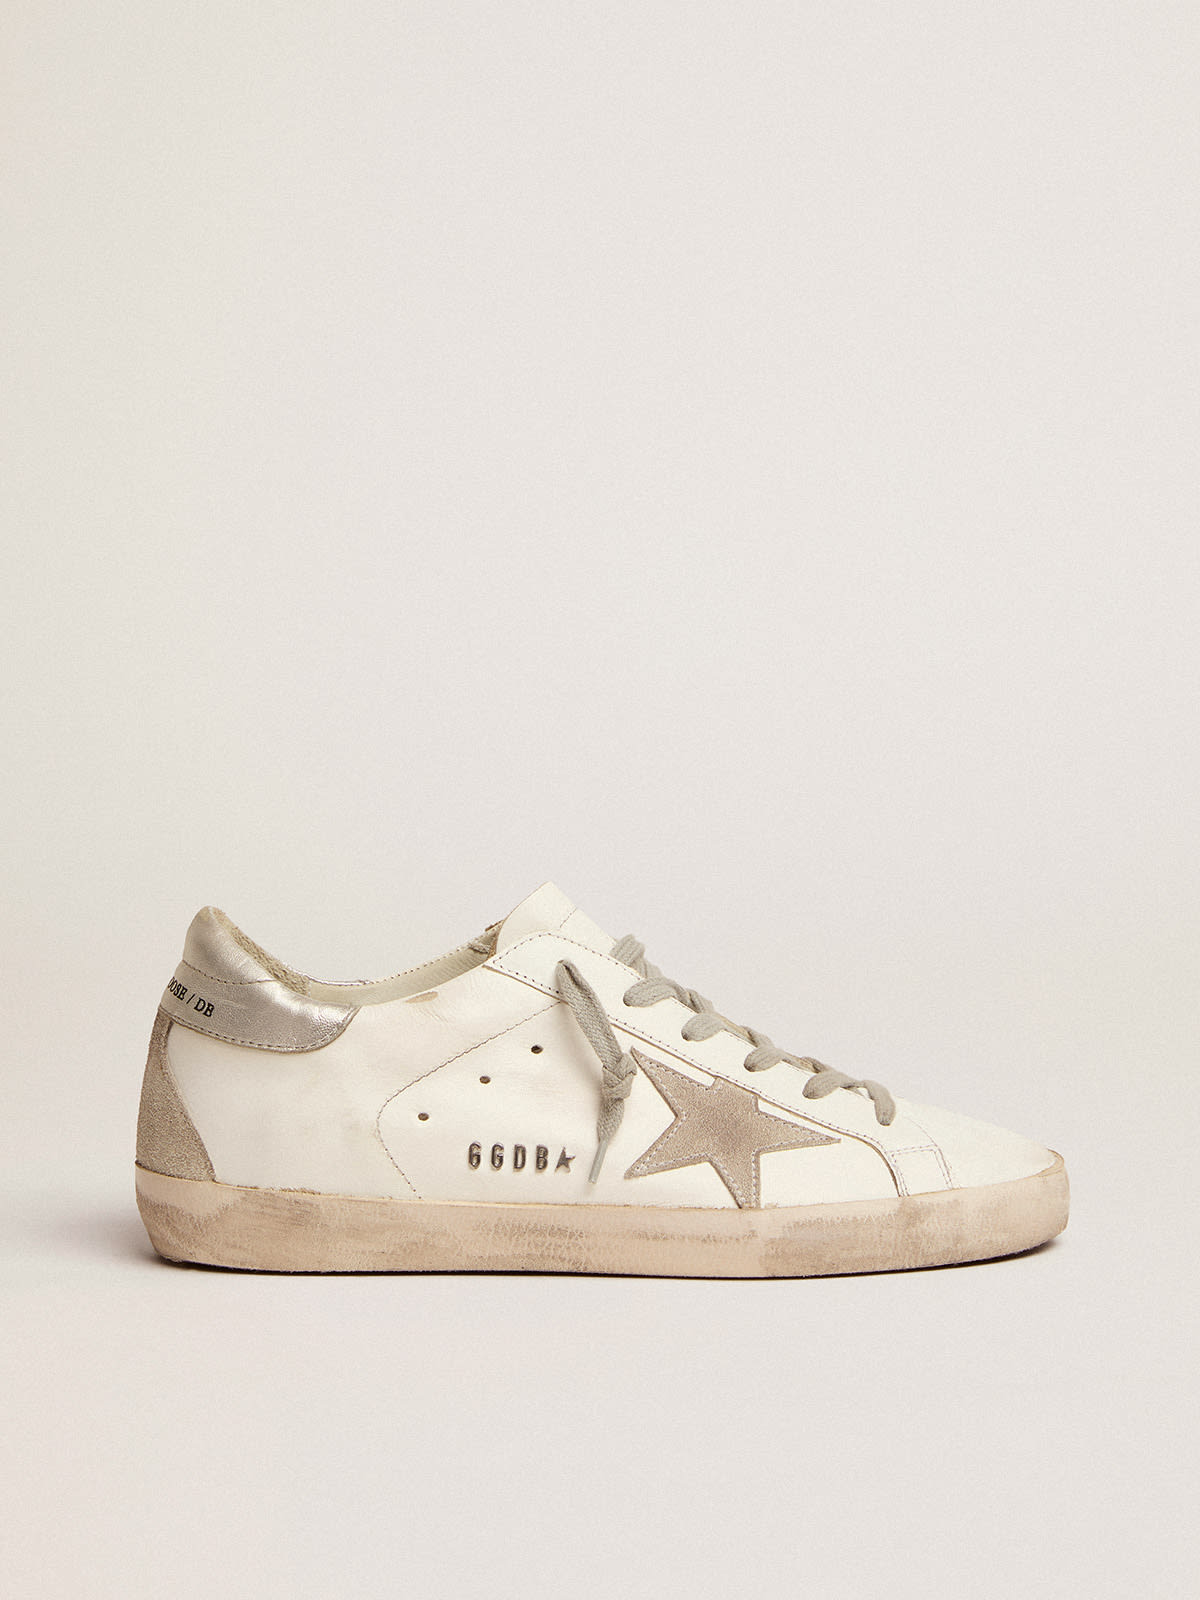 Ciro each delicate Women's Super-Star sneakers with silver heel tab and metal stud lettering |  Golden Goose